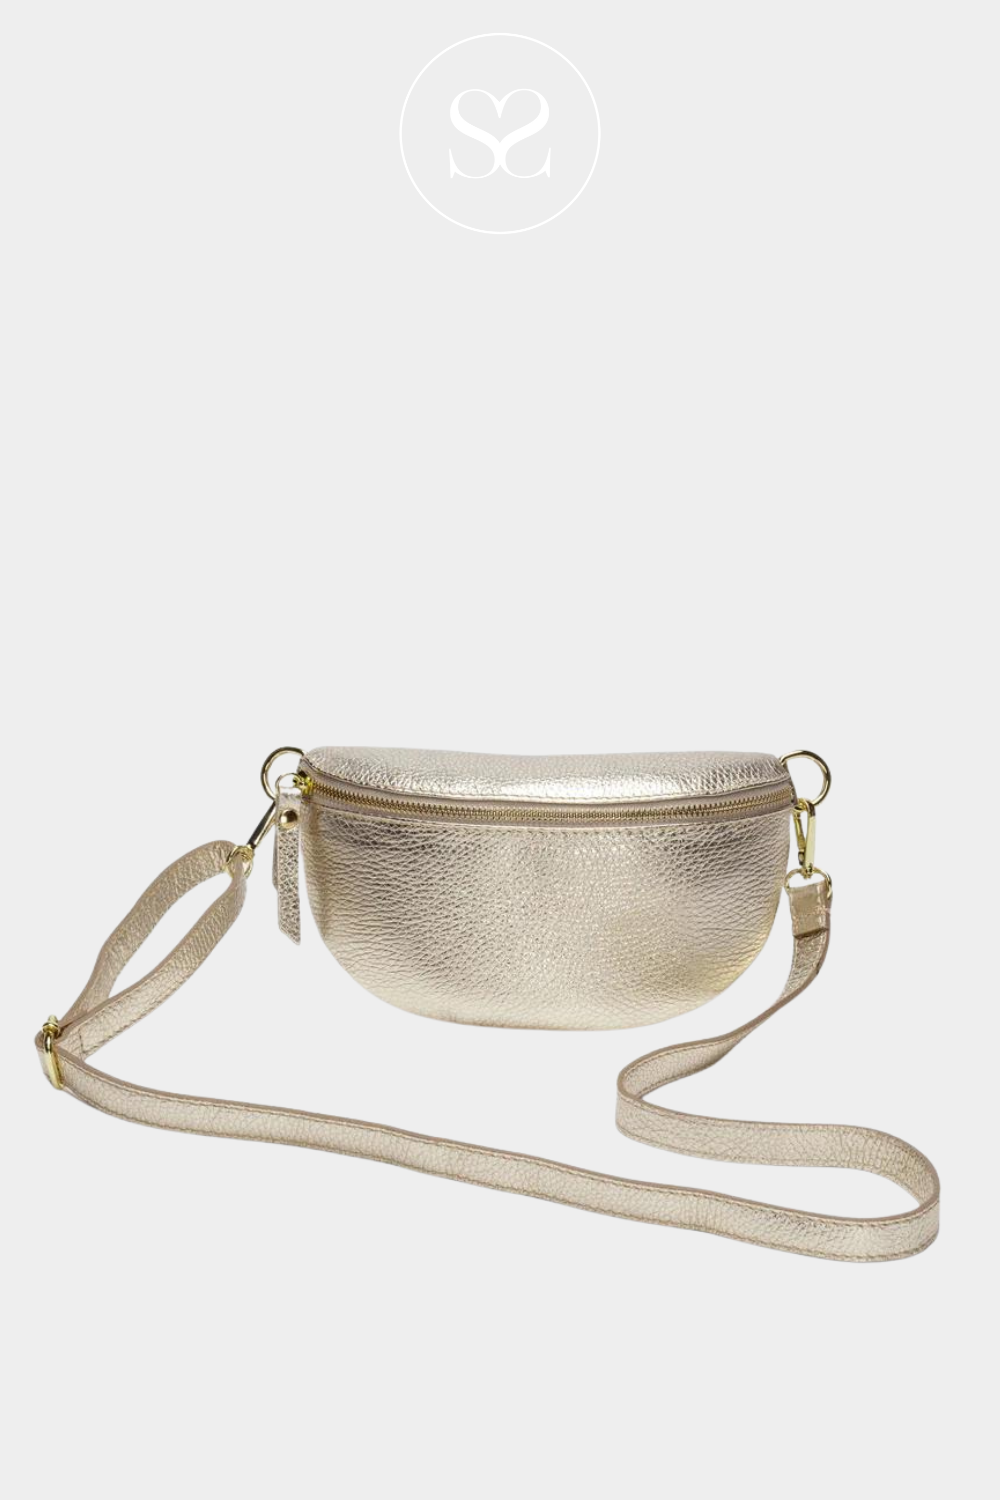 Gold crossbody bag from Elie beaumont